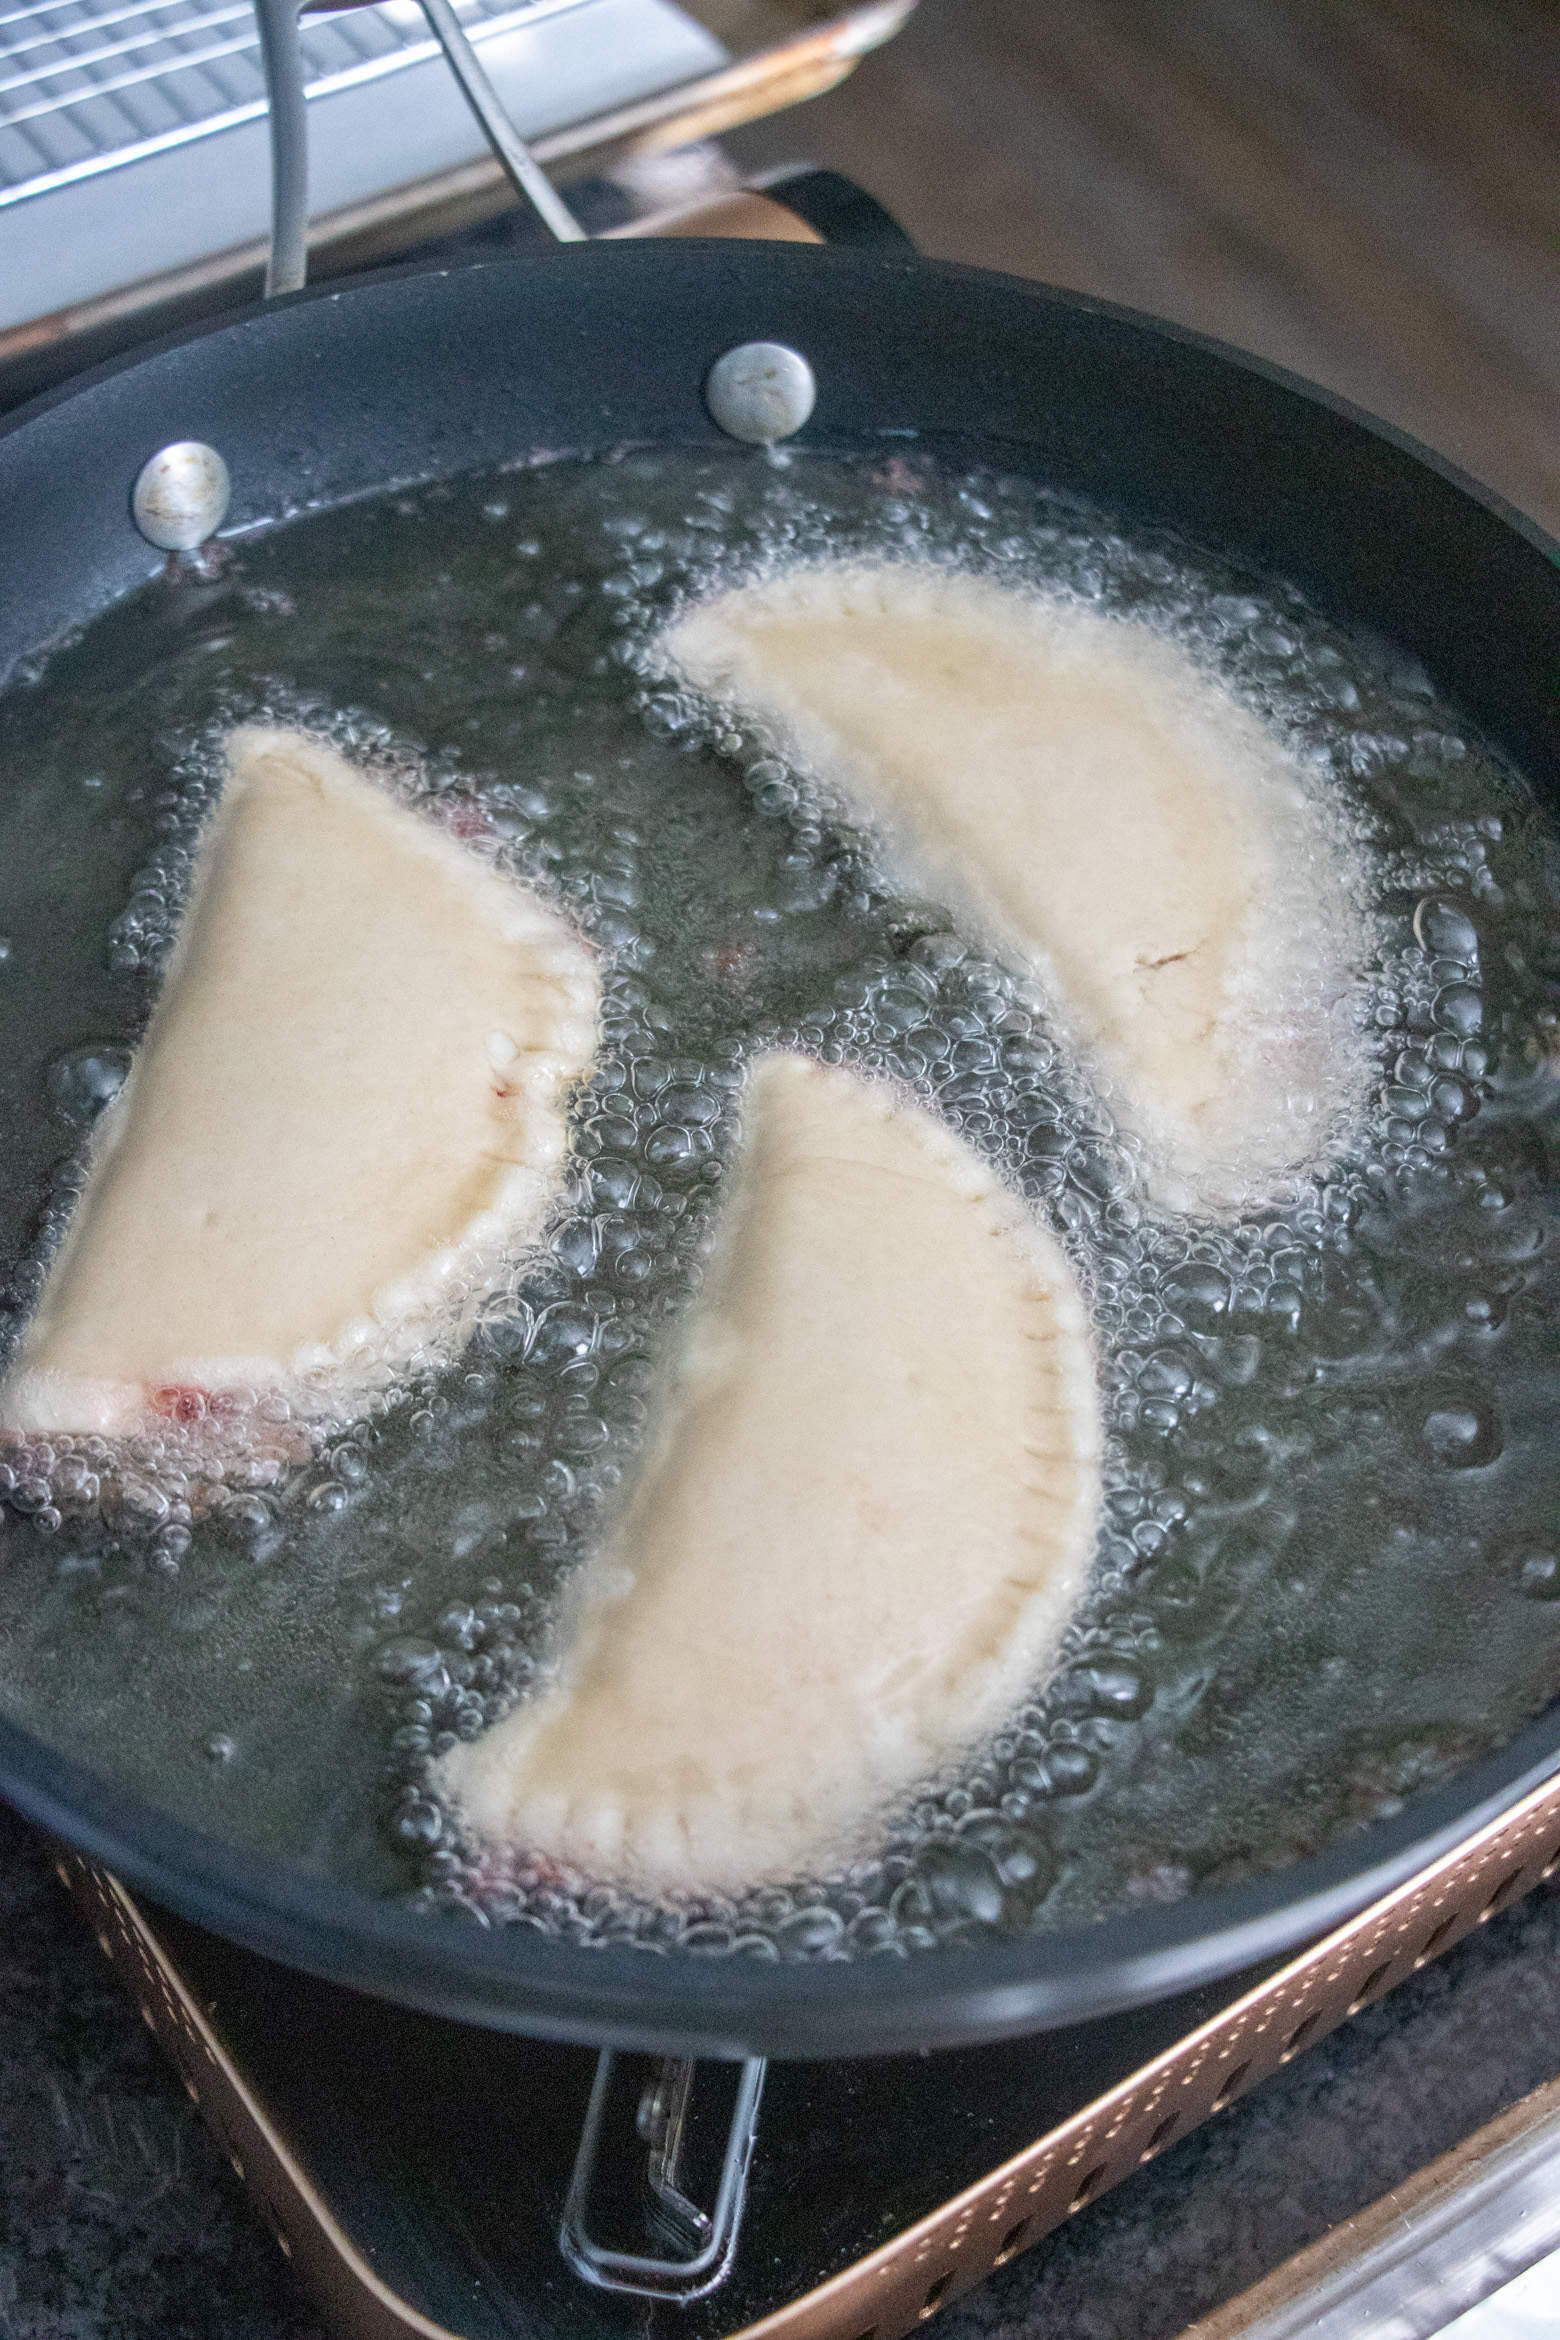 Fried Strawberry Hand Pies frying in oil.